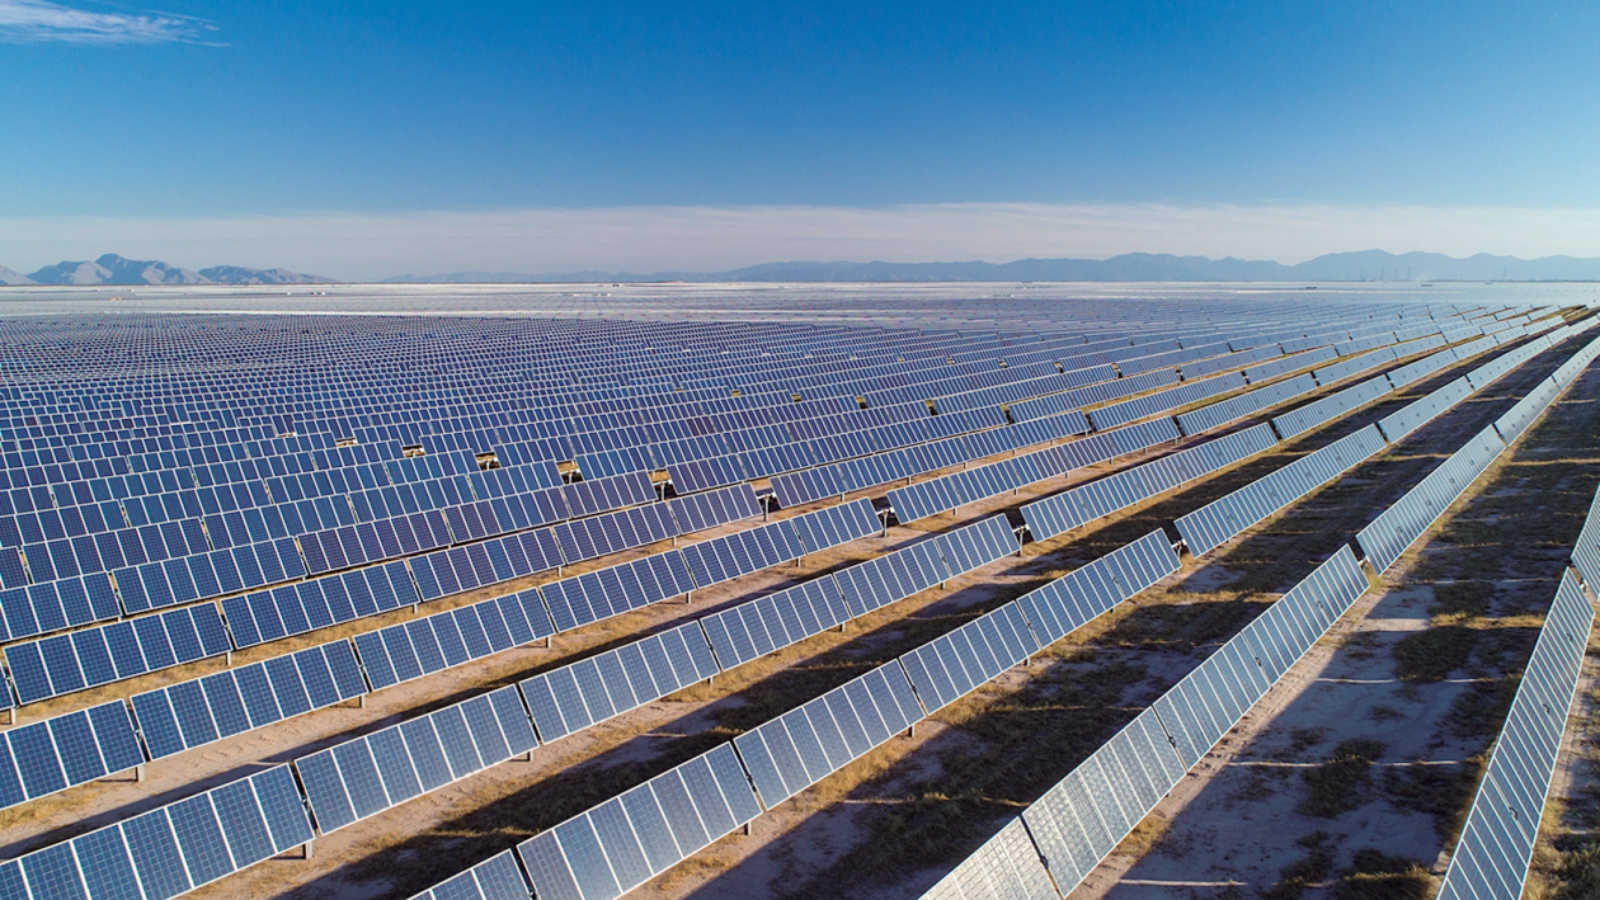 A vast, endless field of rows of silver solar panels under a blue sky.